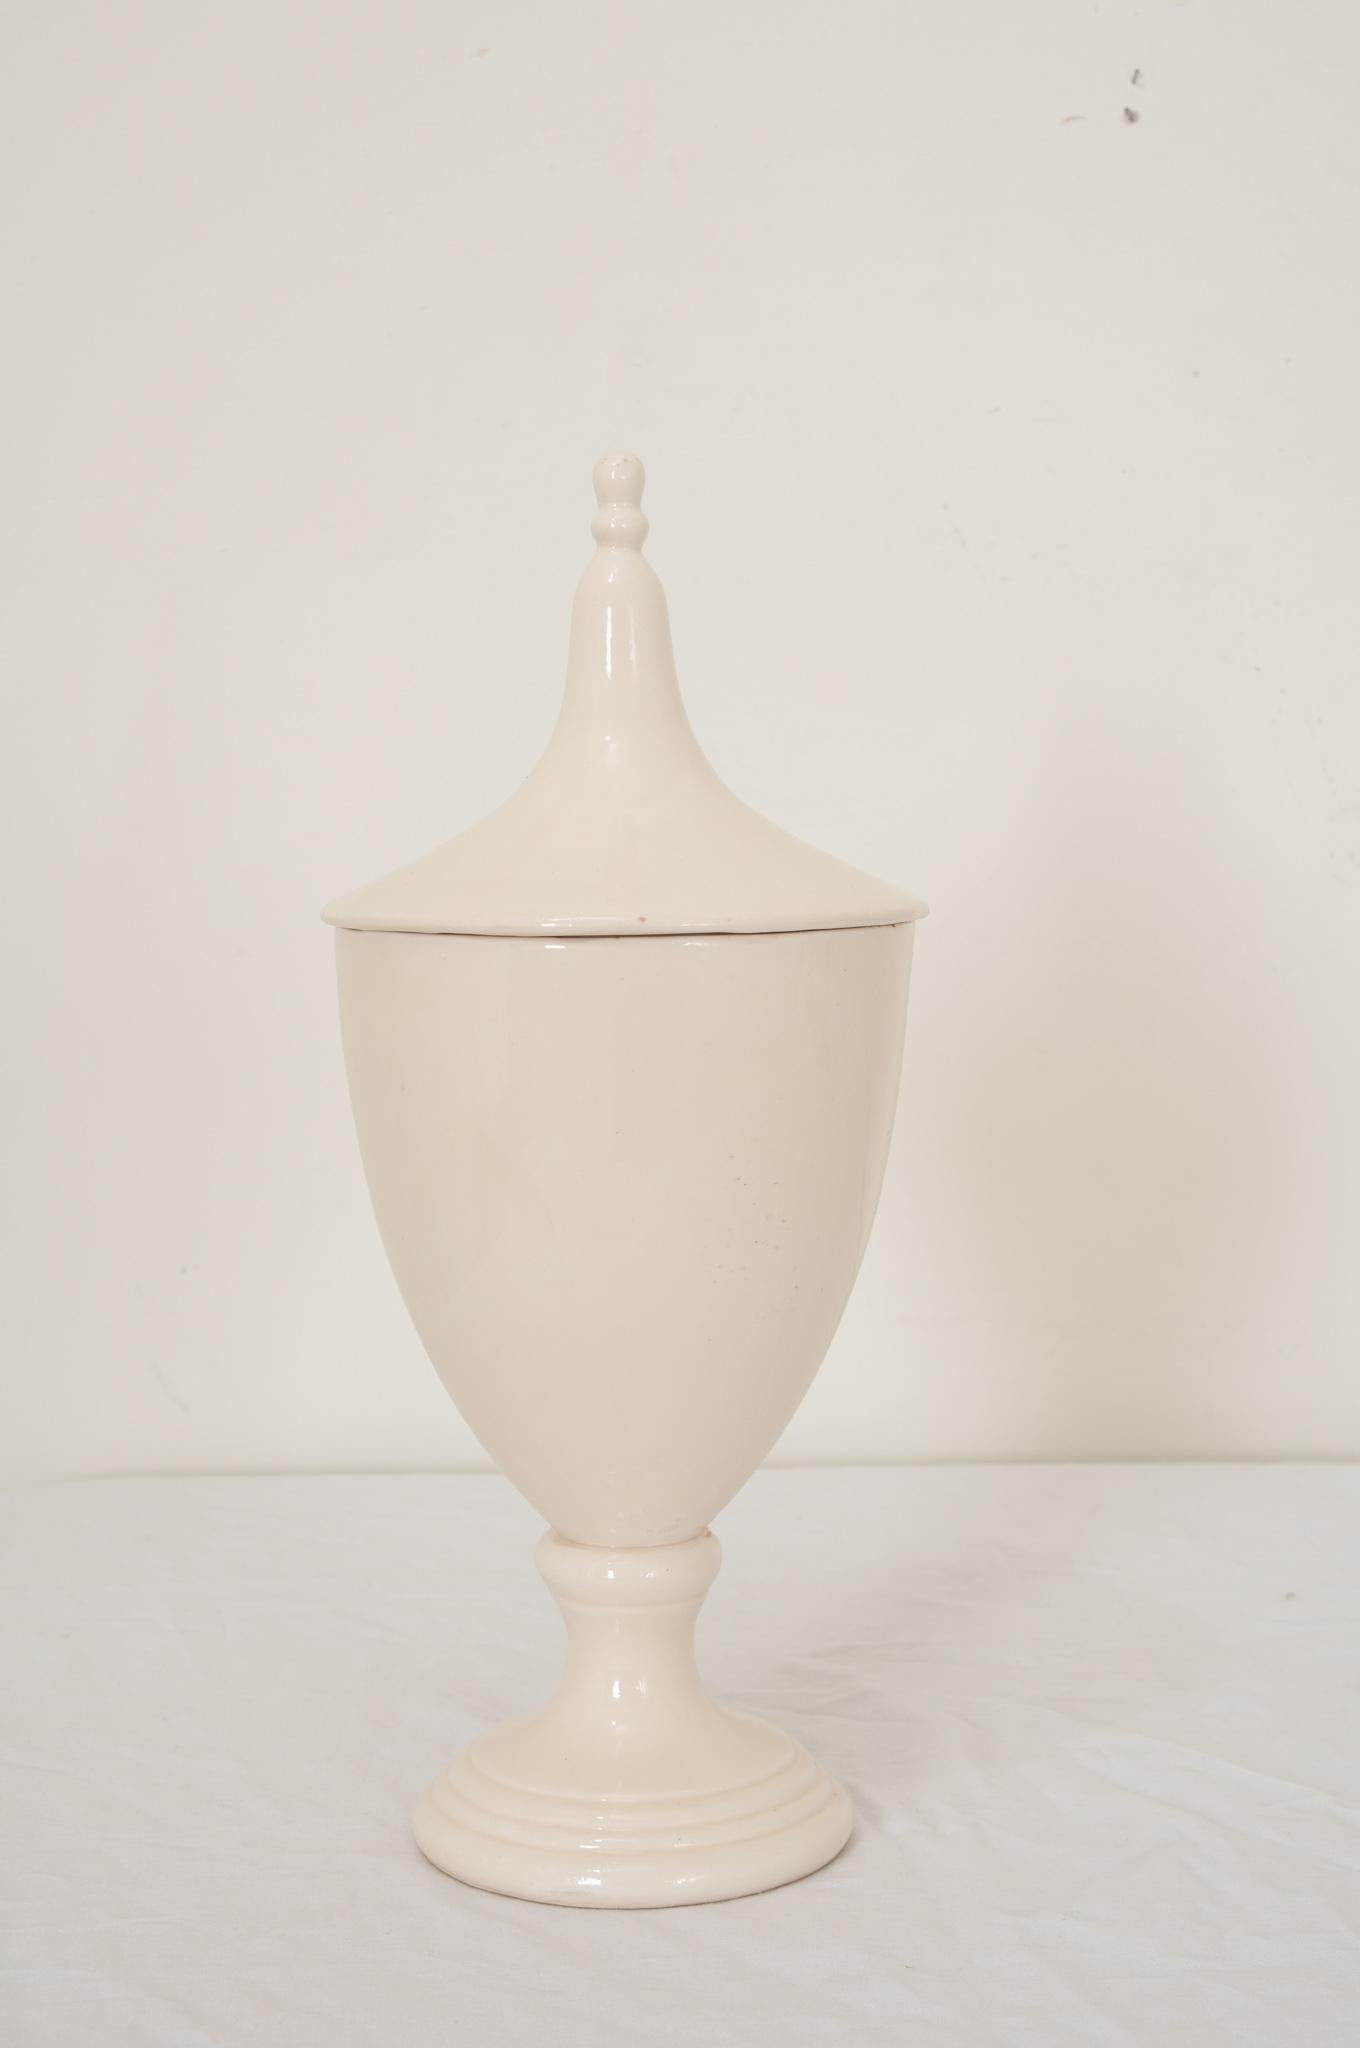 An English 19th Century apothecary or herbalist jar of white ceramic in the shape of a classical urn. Jars were used by apothecaries in pharmacies and dispensaries in hospitals and monasteries. Apothecaries needed containers to store herbs, roots,